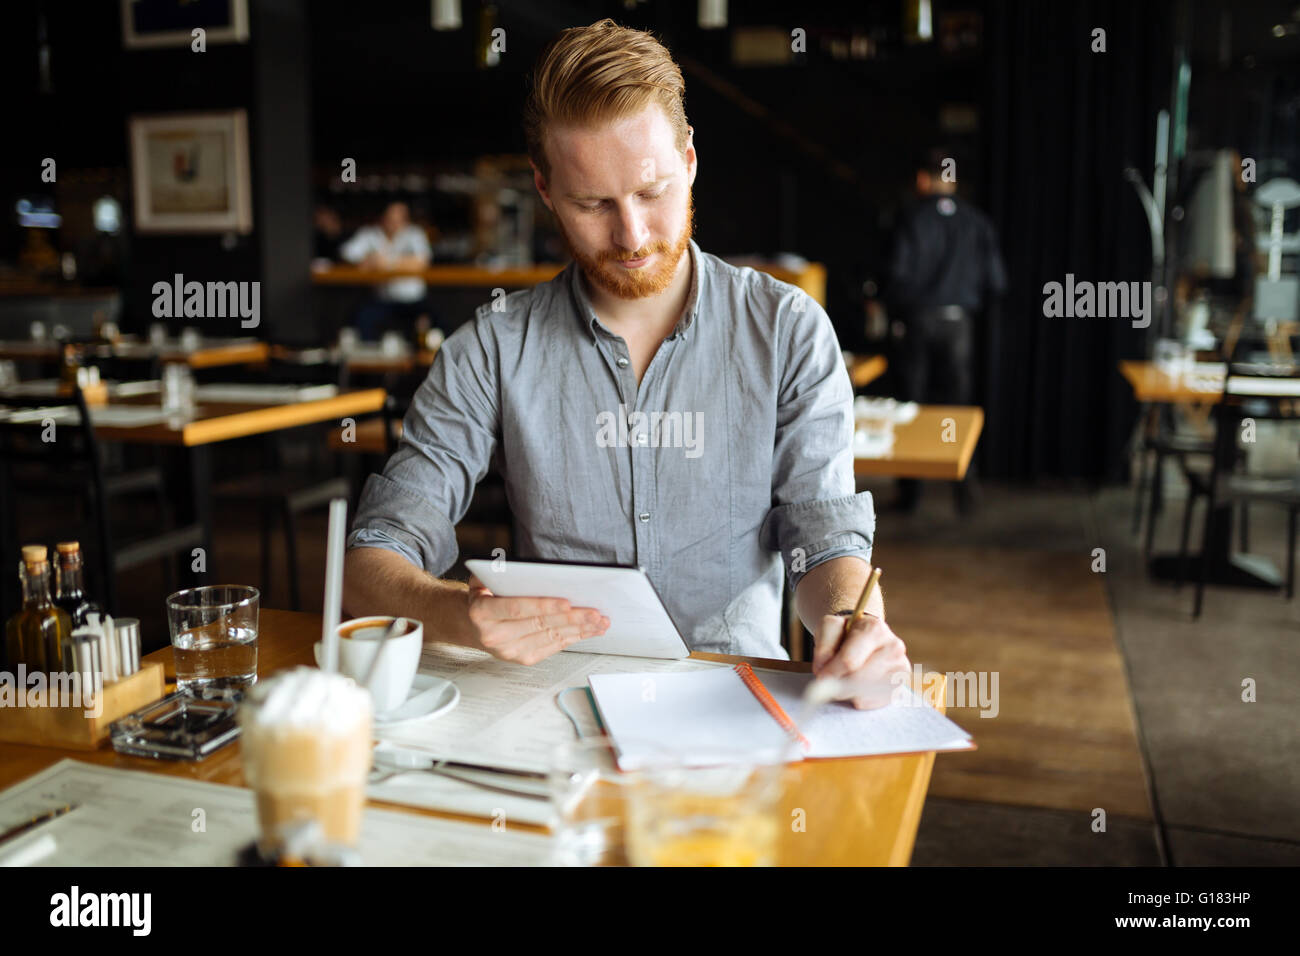 Businessman taking notes and writing down new ideas in cafe during break Stock Photo